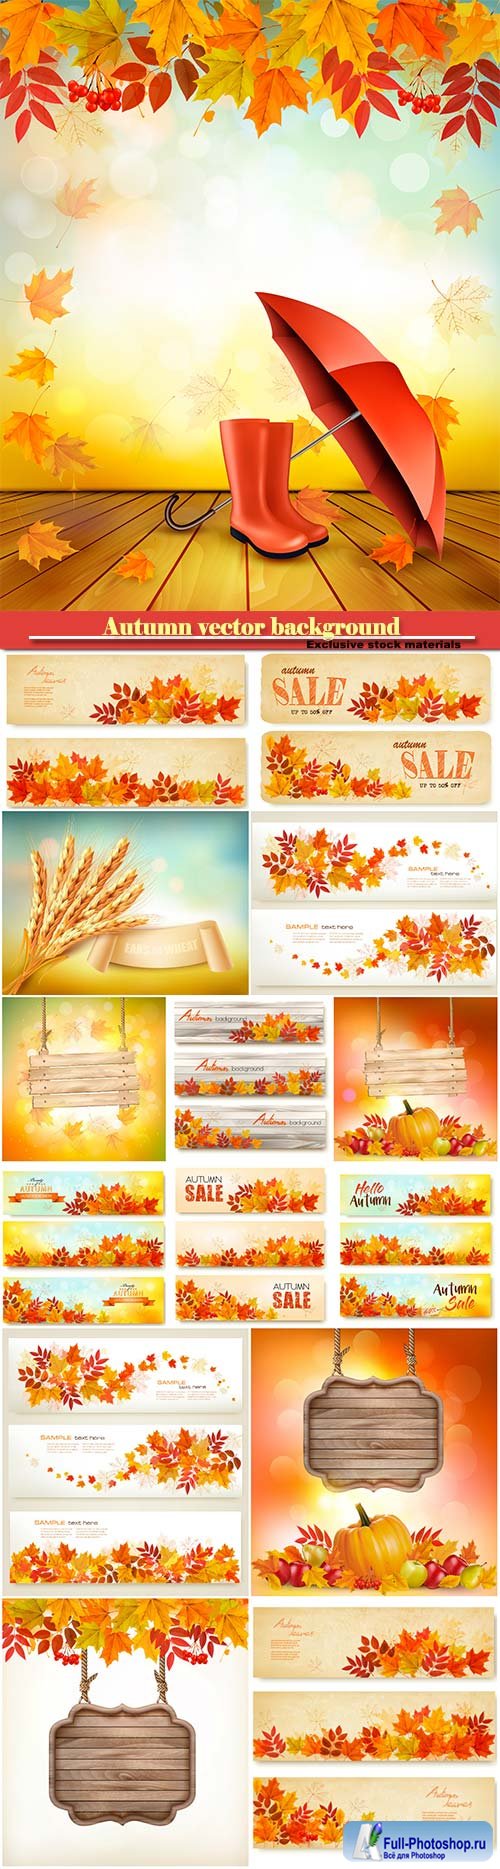 Autumn vector background with fruit and leaves, autumn sale banners